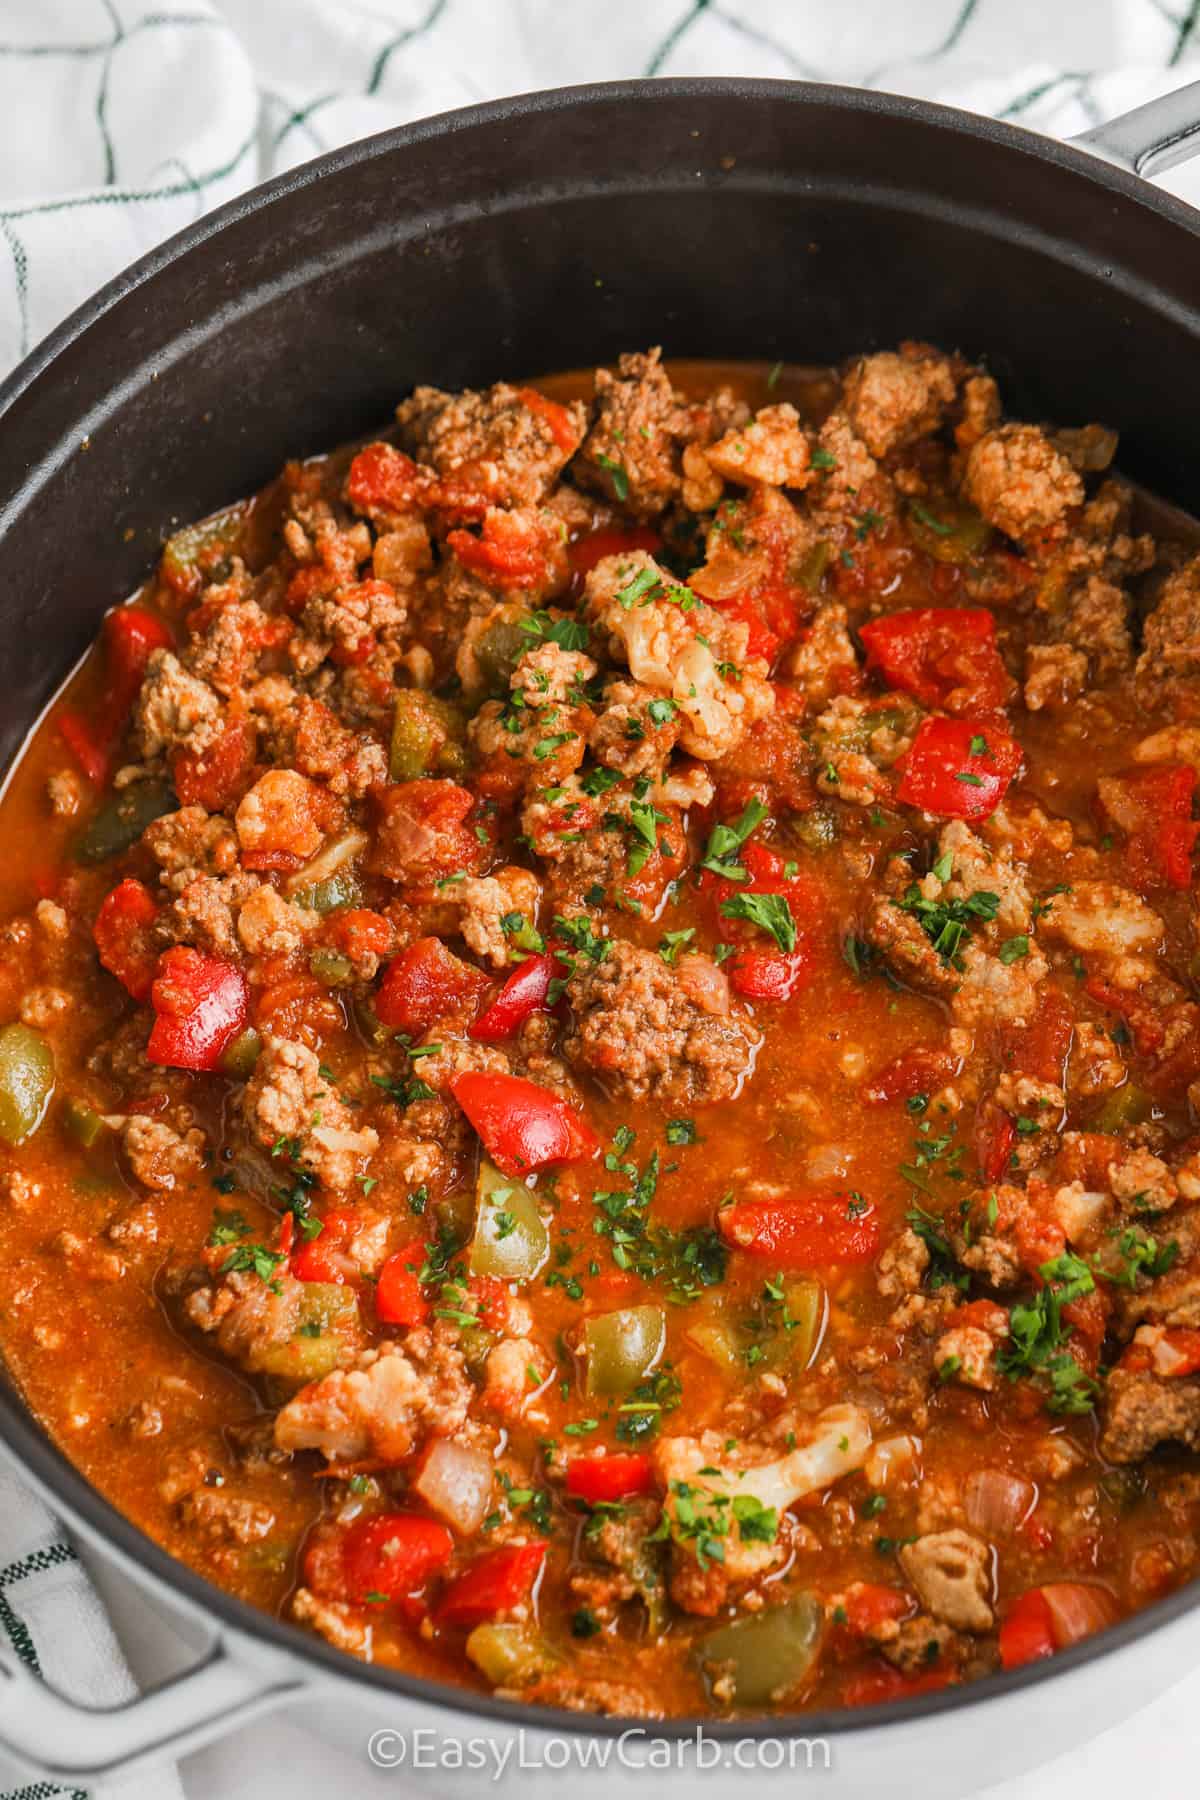 Low Carb Stovetop Chili in a pot